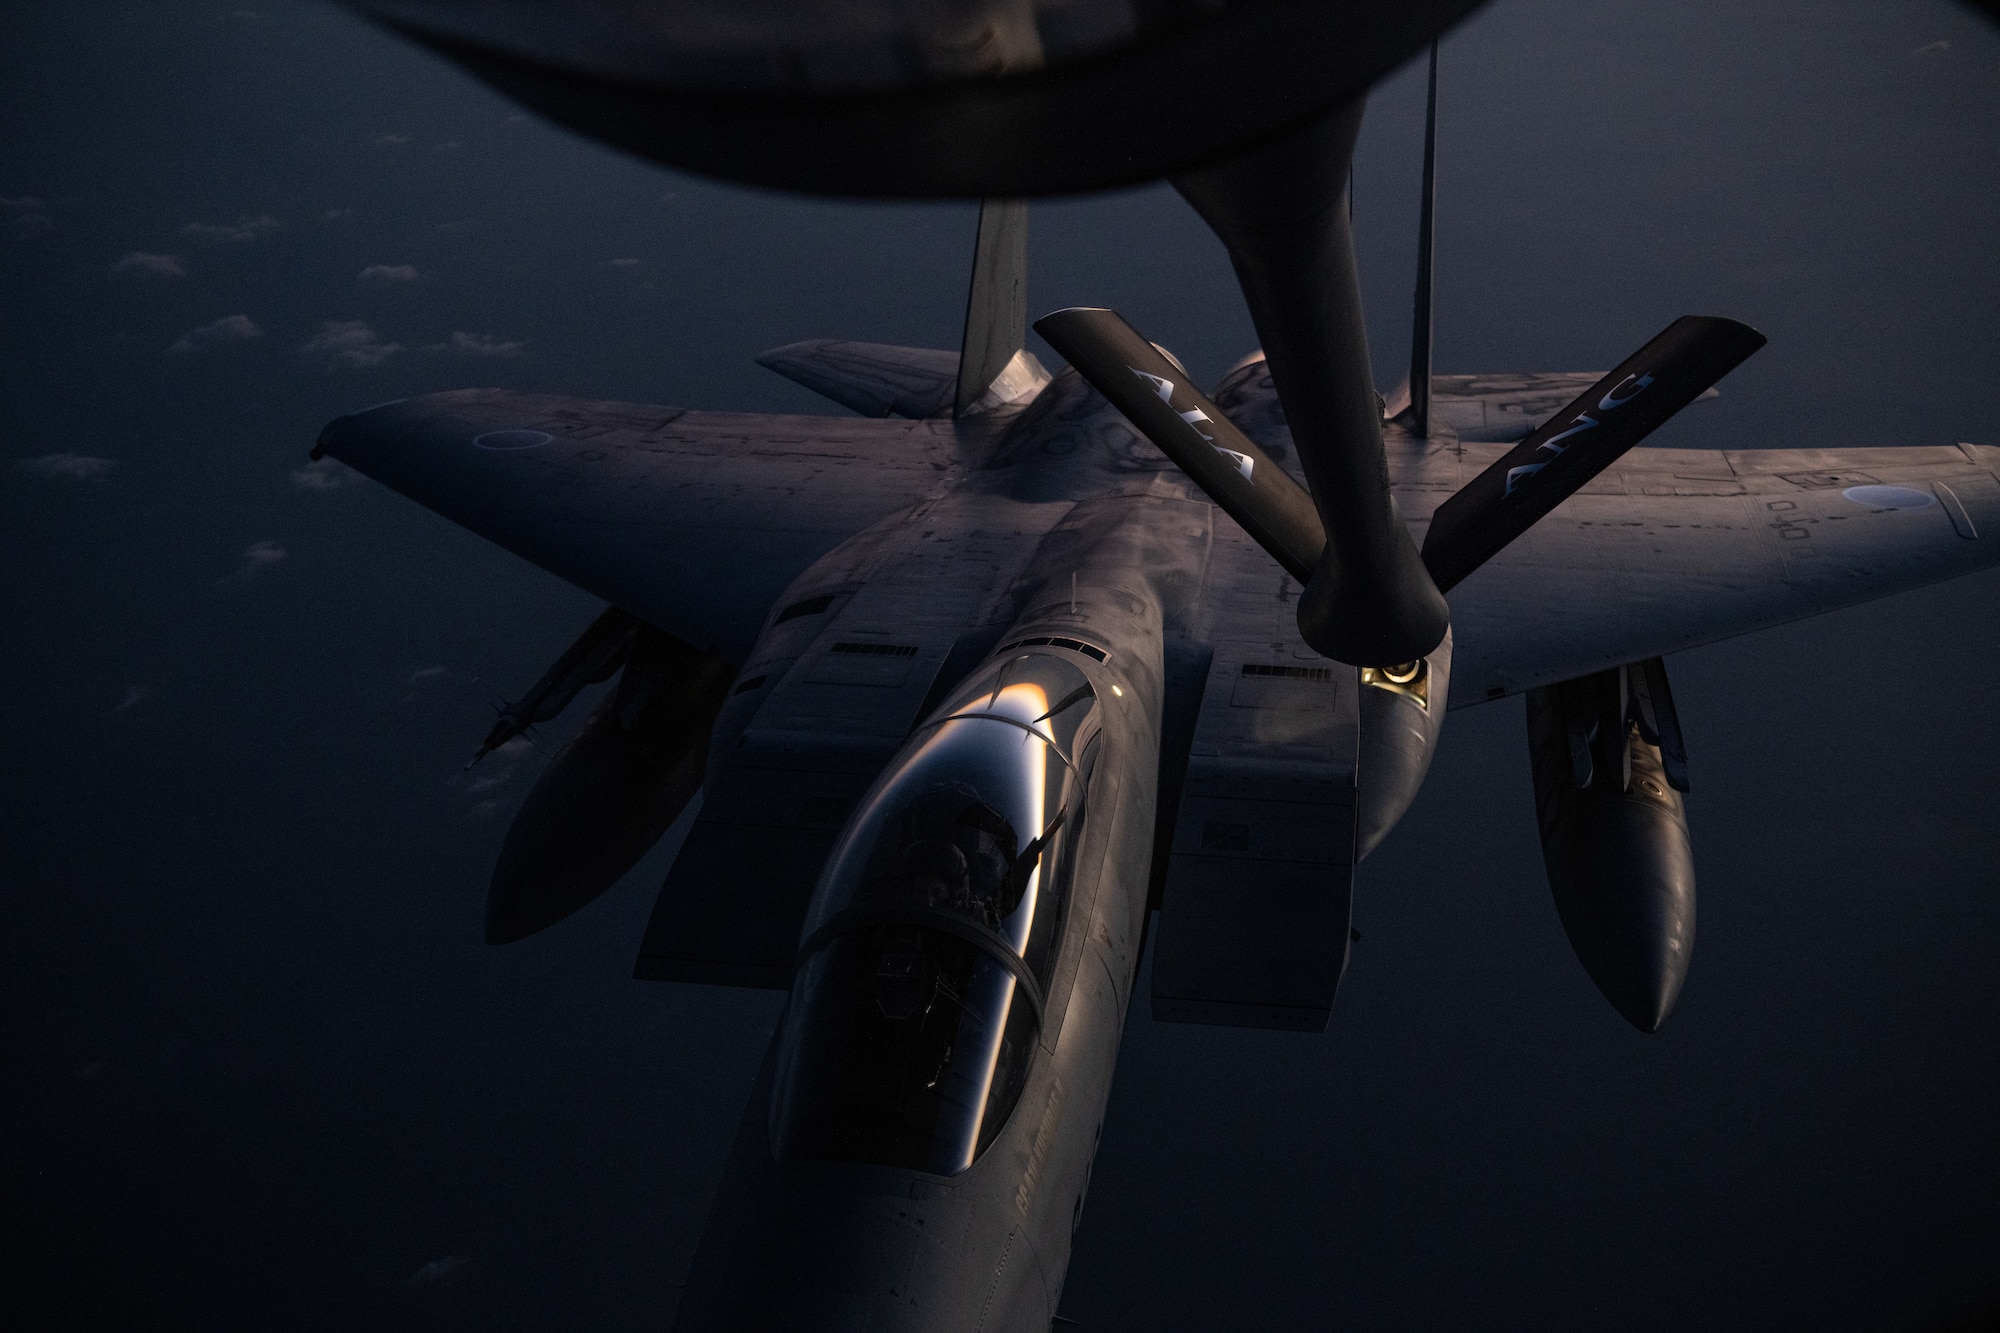 A U.S. Air Force KC-135 Stratotanker from the 909th Air Refueling Squadron refuels a Japan Air Self-Defense Force F-15J Eagle over the Pacific Ocean during Exercise Southern Beach, Oct. 28, 2021. Bilateral training exercises like Southern Beach help build trusting relationships among foreign and domestic forces, ensuring allies are able to come together to effectively respond to demanding scenarios and execute high-end missions in defense of a free and open Indo-Pacific region. (U.S. Air Force photo by Staff Sgt. Savannah L. Waters)